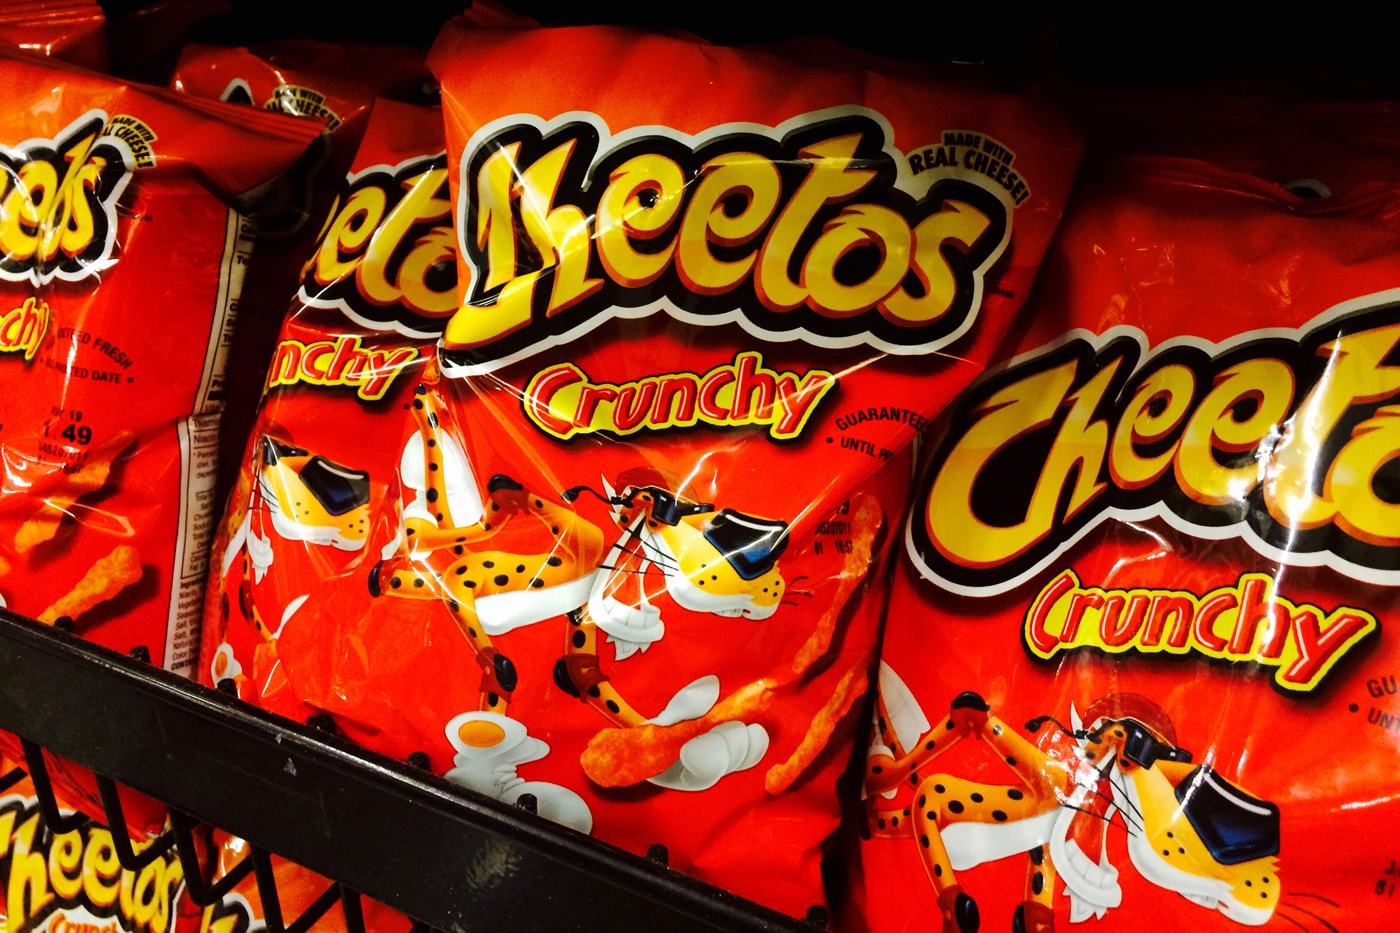 Cheetos Ads Projects  Photos, videos, logos, illustrations and